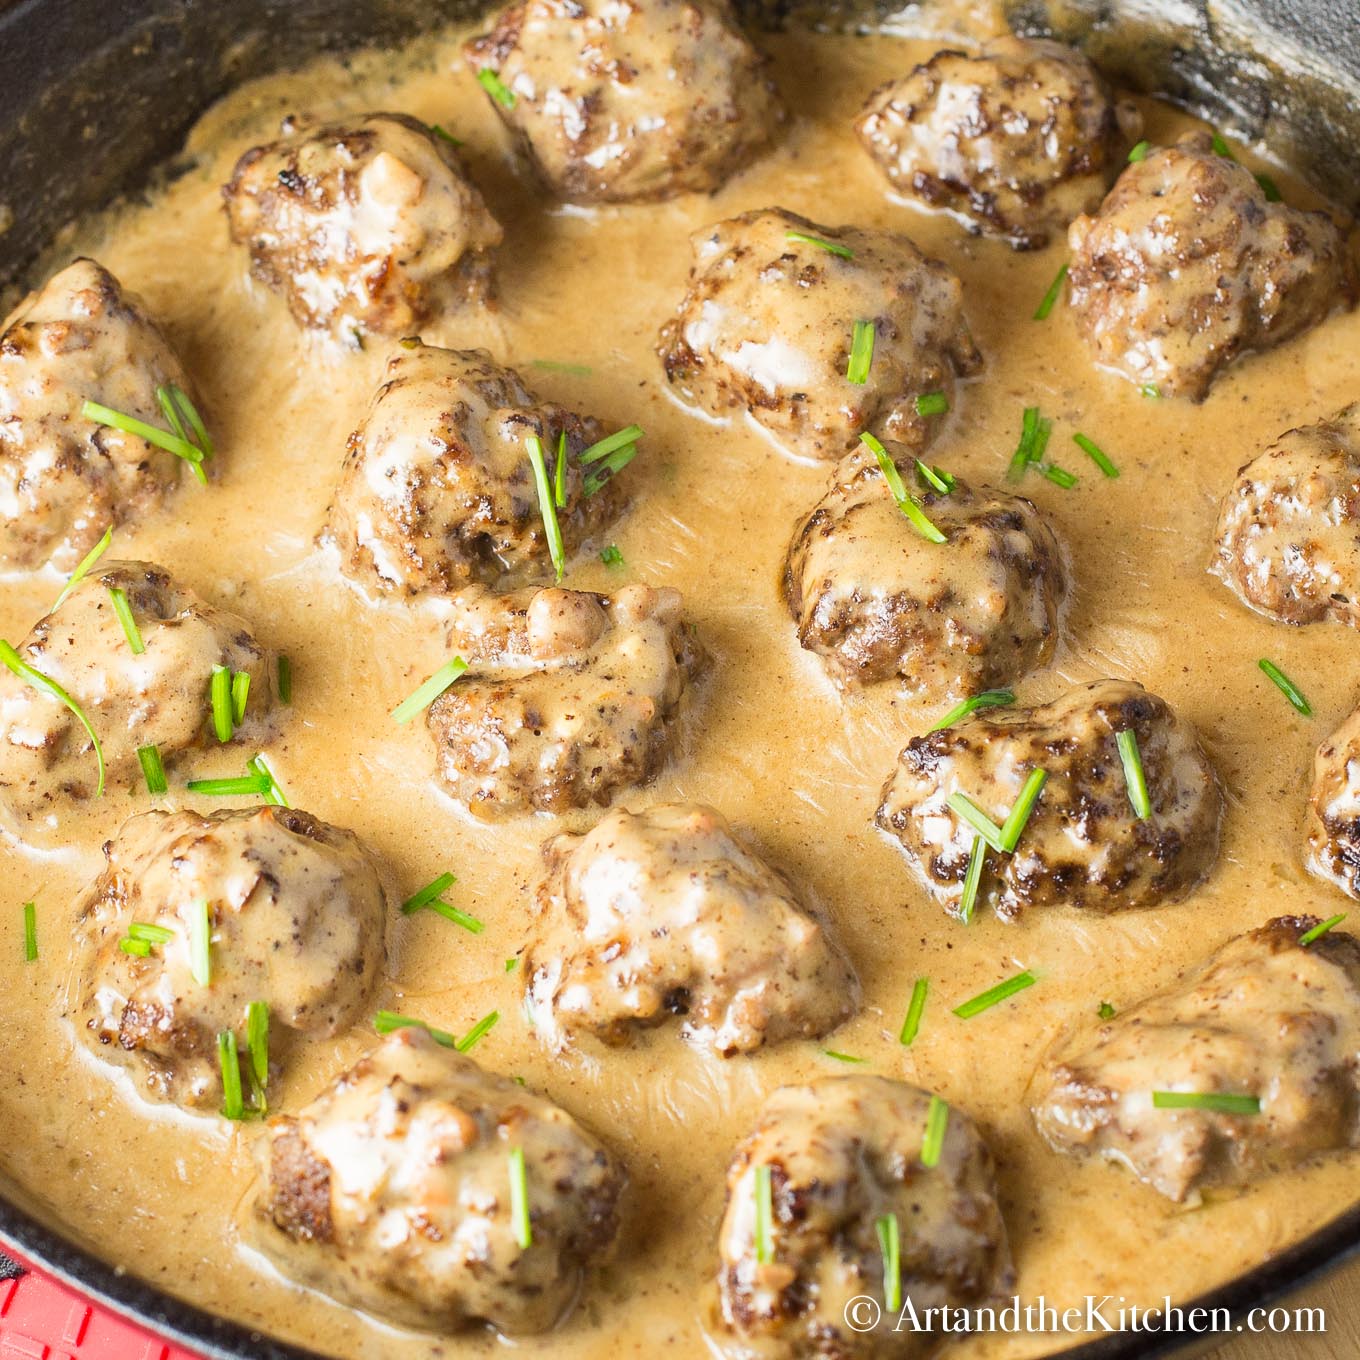 Meatballs simmering in a creamy sauce in a cast iron skillet, garnished with chives.